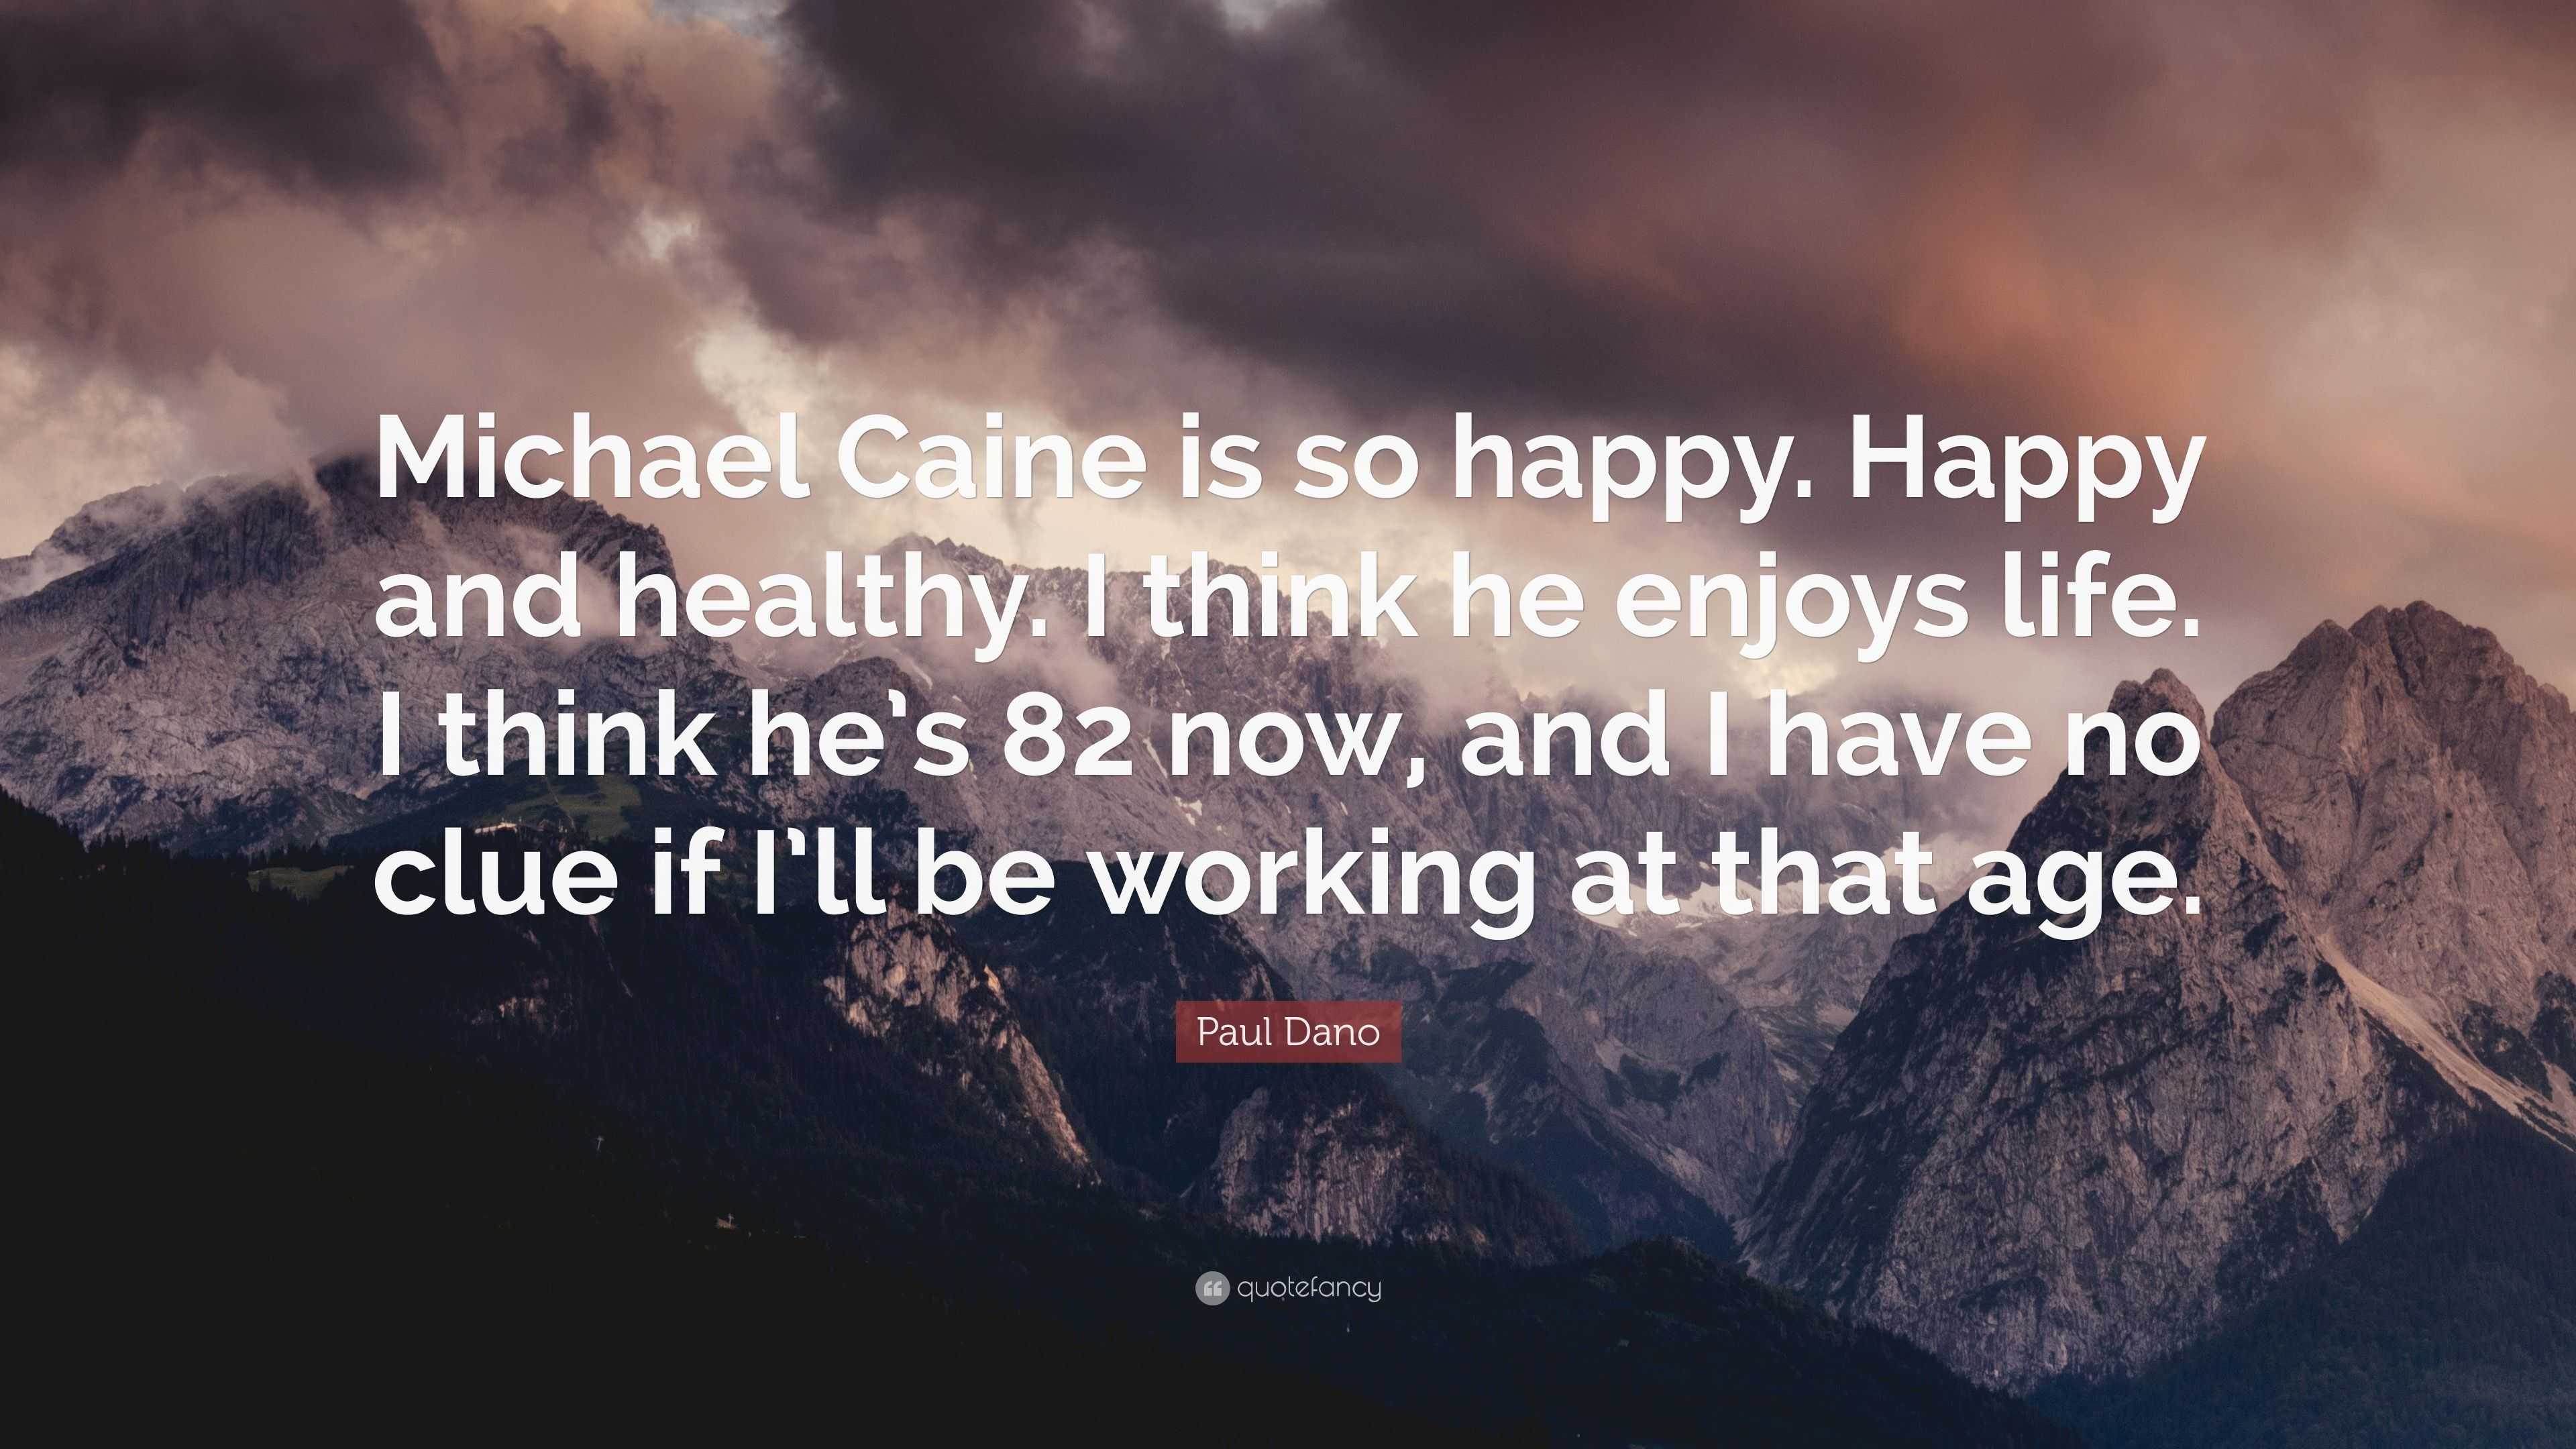 Paul Dano Quote Michael Caine Is So Happy Happy And Healthy I Think He Enjoys Life I Think He S Now And I Have No Clue If I Ll Be